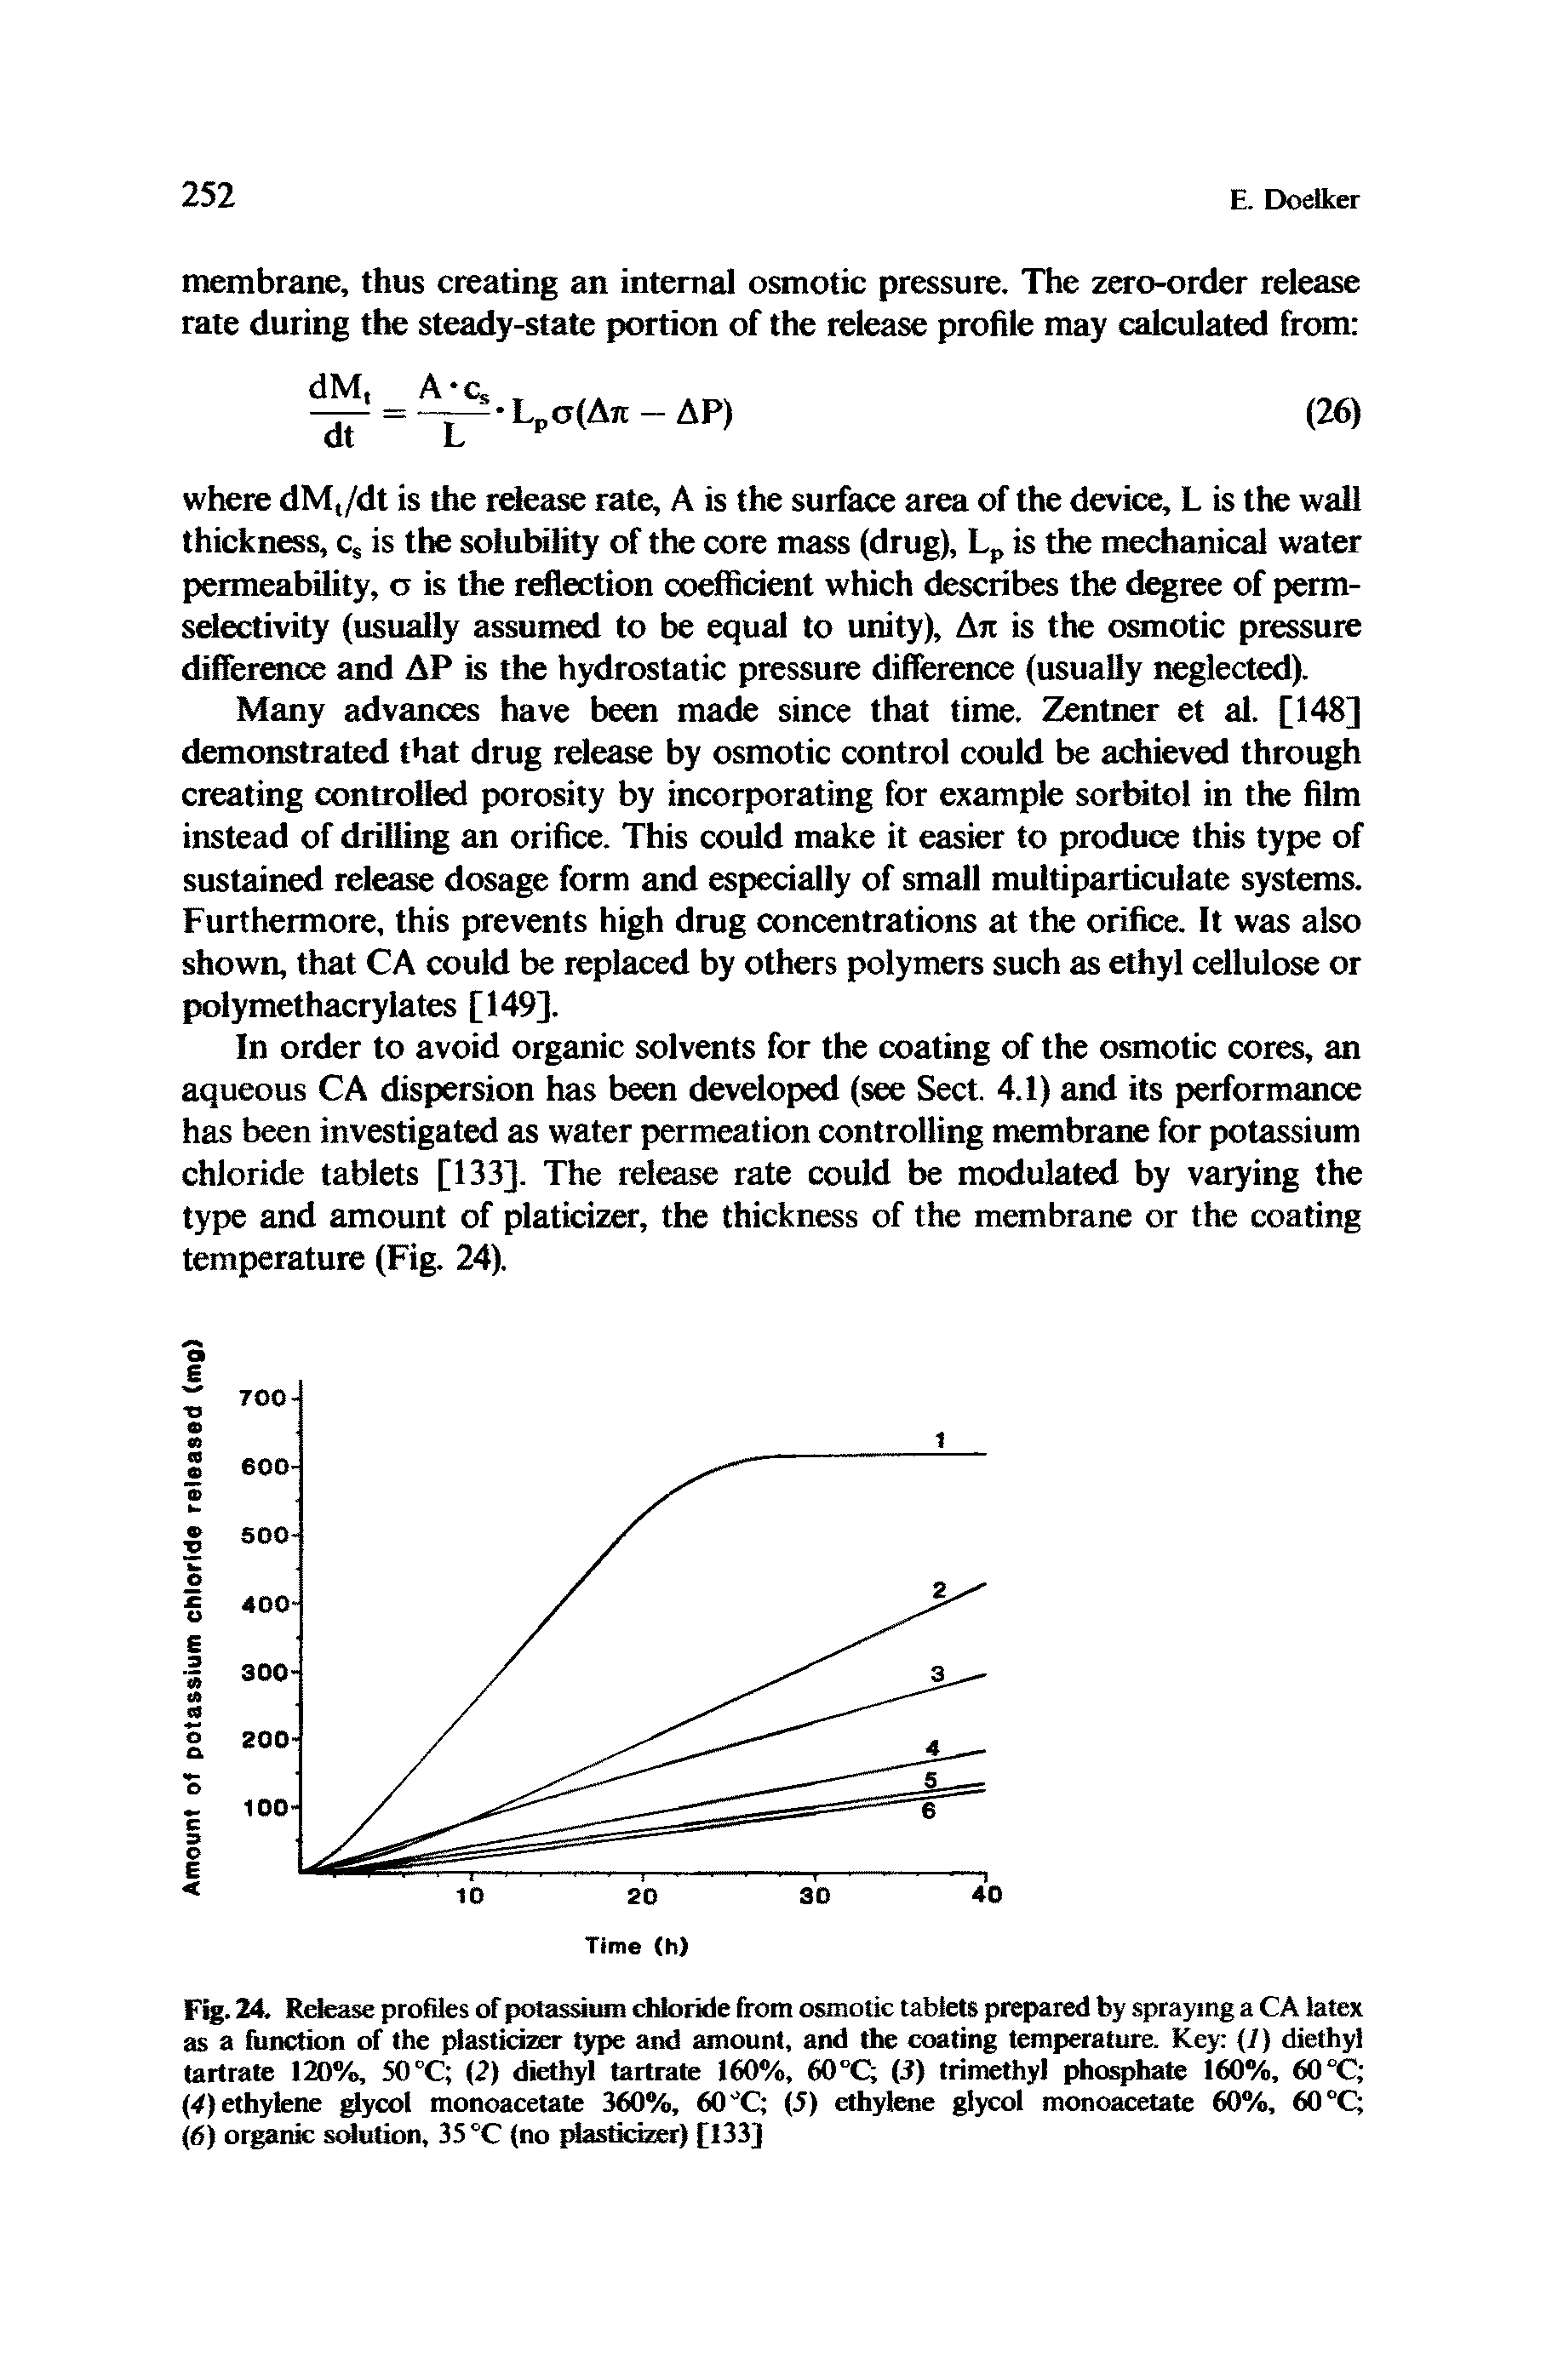 Fig. 24. Release profiles of potassium chloride from osmotic tablets prepared by spraying a CA latex as a function of the plasticizer type and amount, and the coating temperature. Key (J) diethyl tartrate 120%, 50°C (2) diethyl tartrate 160%, 60°Q (J) trimethyl phosphate 160%, 60°C (4) ethylene glycol monoacetate 360%, 60 °C (5) ethylene glycol monoacetate 60%, 60 °C (6) organic solution, 35 °C (no plasticizer) [133]...